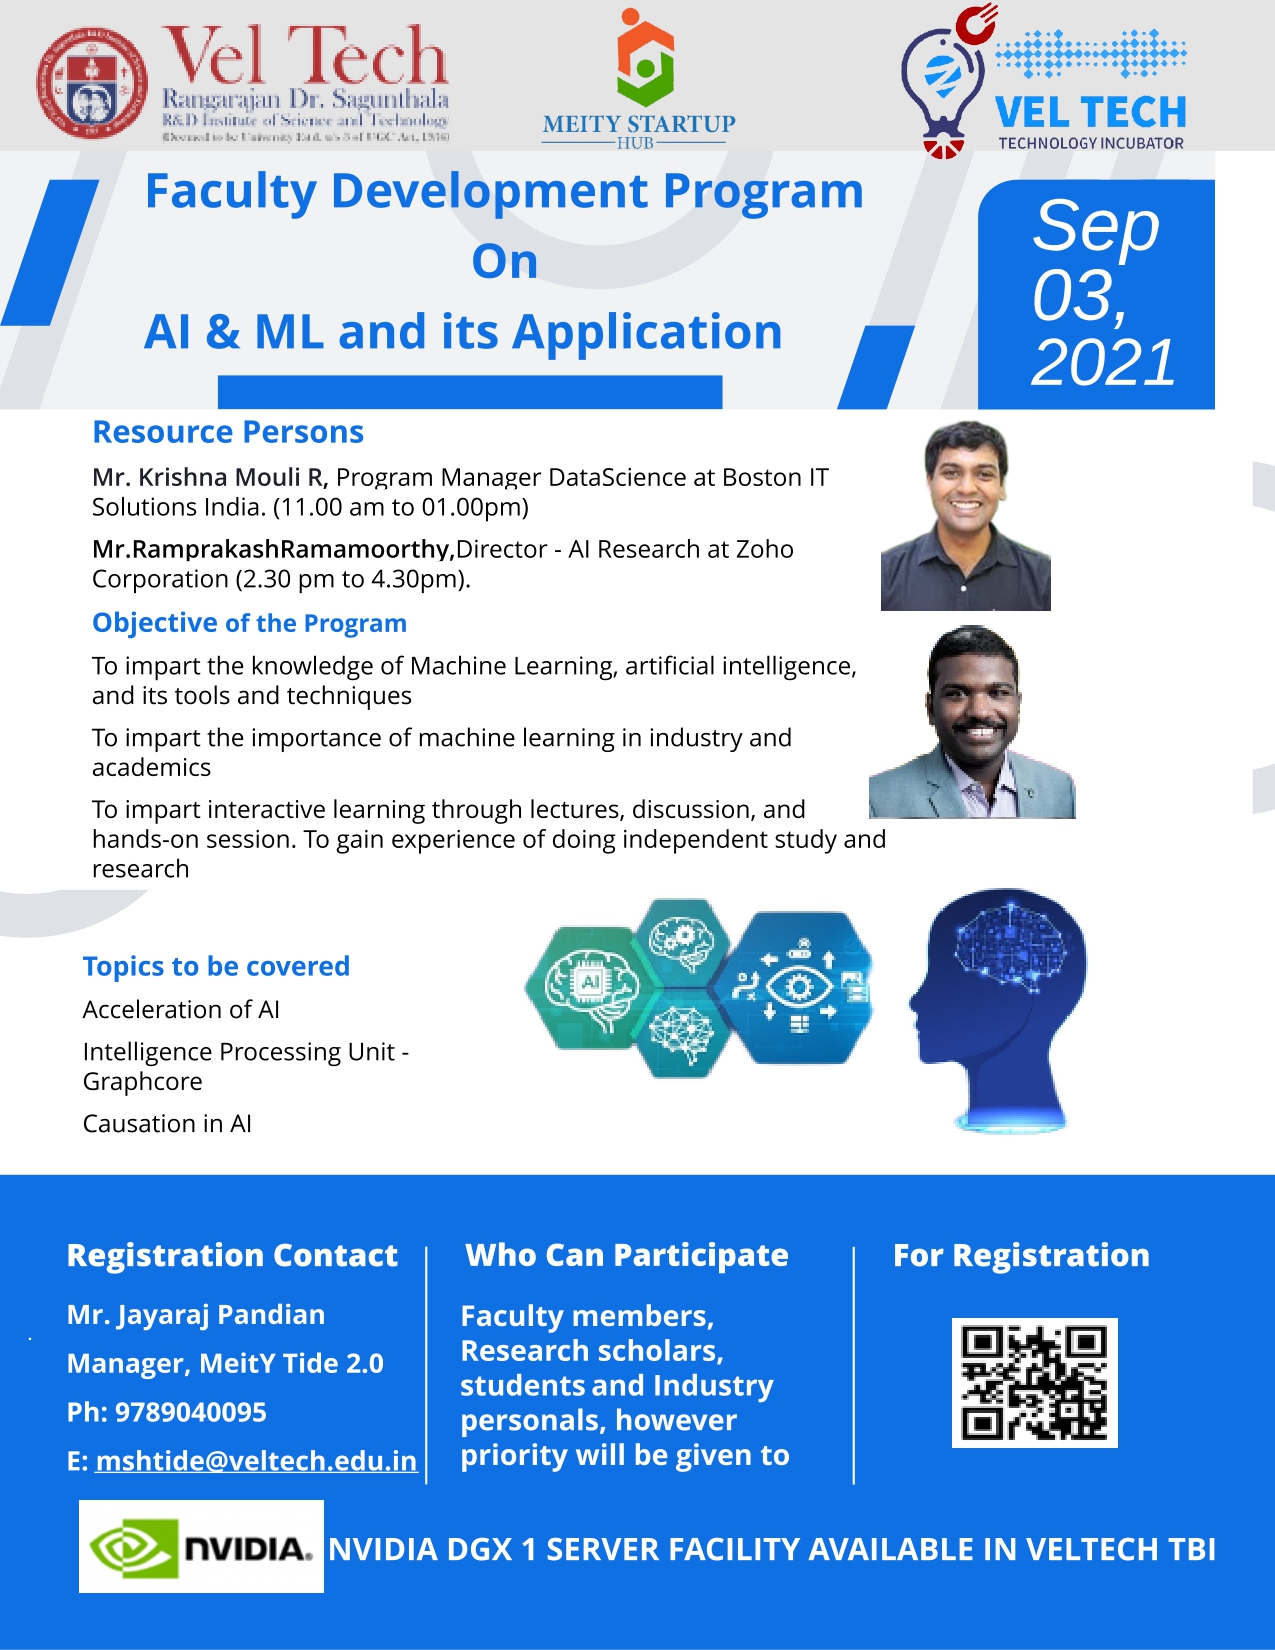 One day Faculty Development Program on AI and ML and its Application 2021